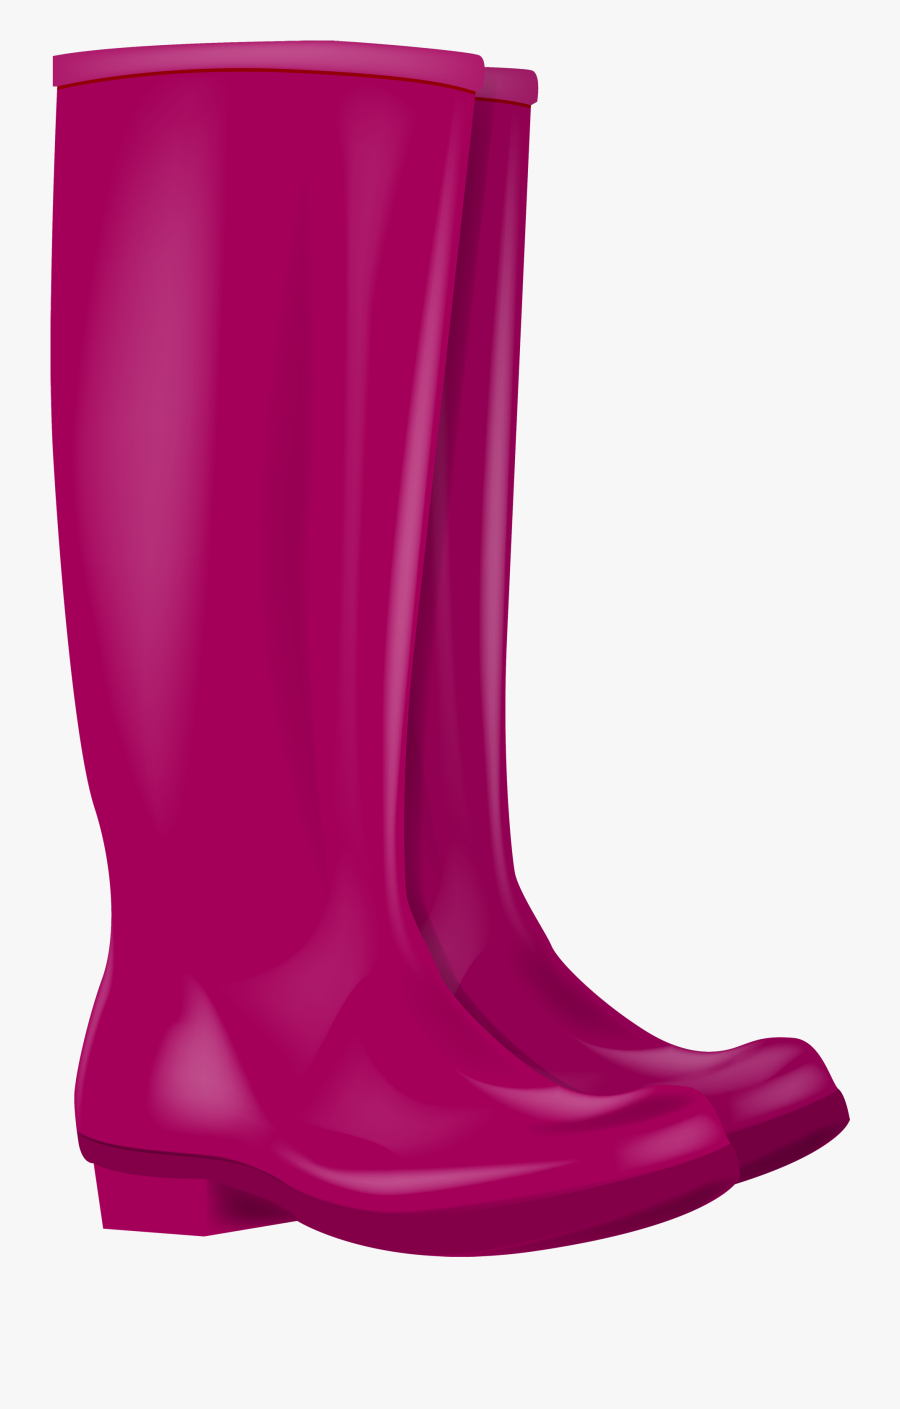 Pink Rubber Boots Png Clipart Image - Png Image Of Rubber Boots, Transparent Clipart